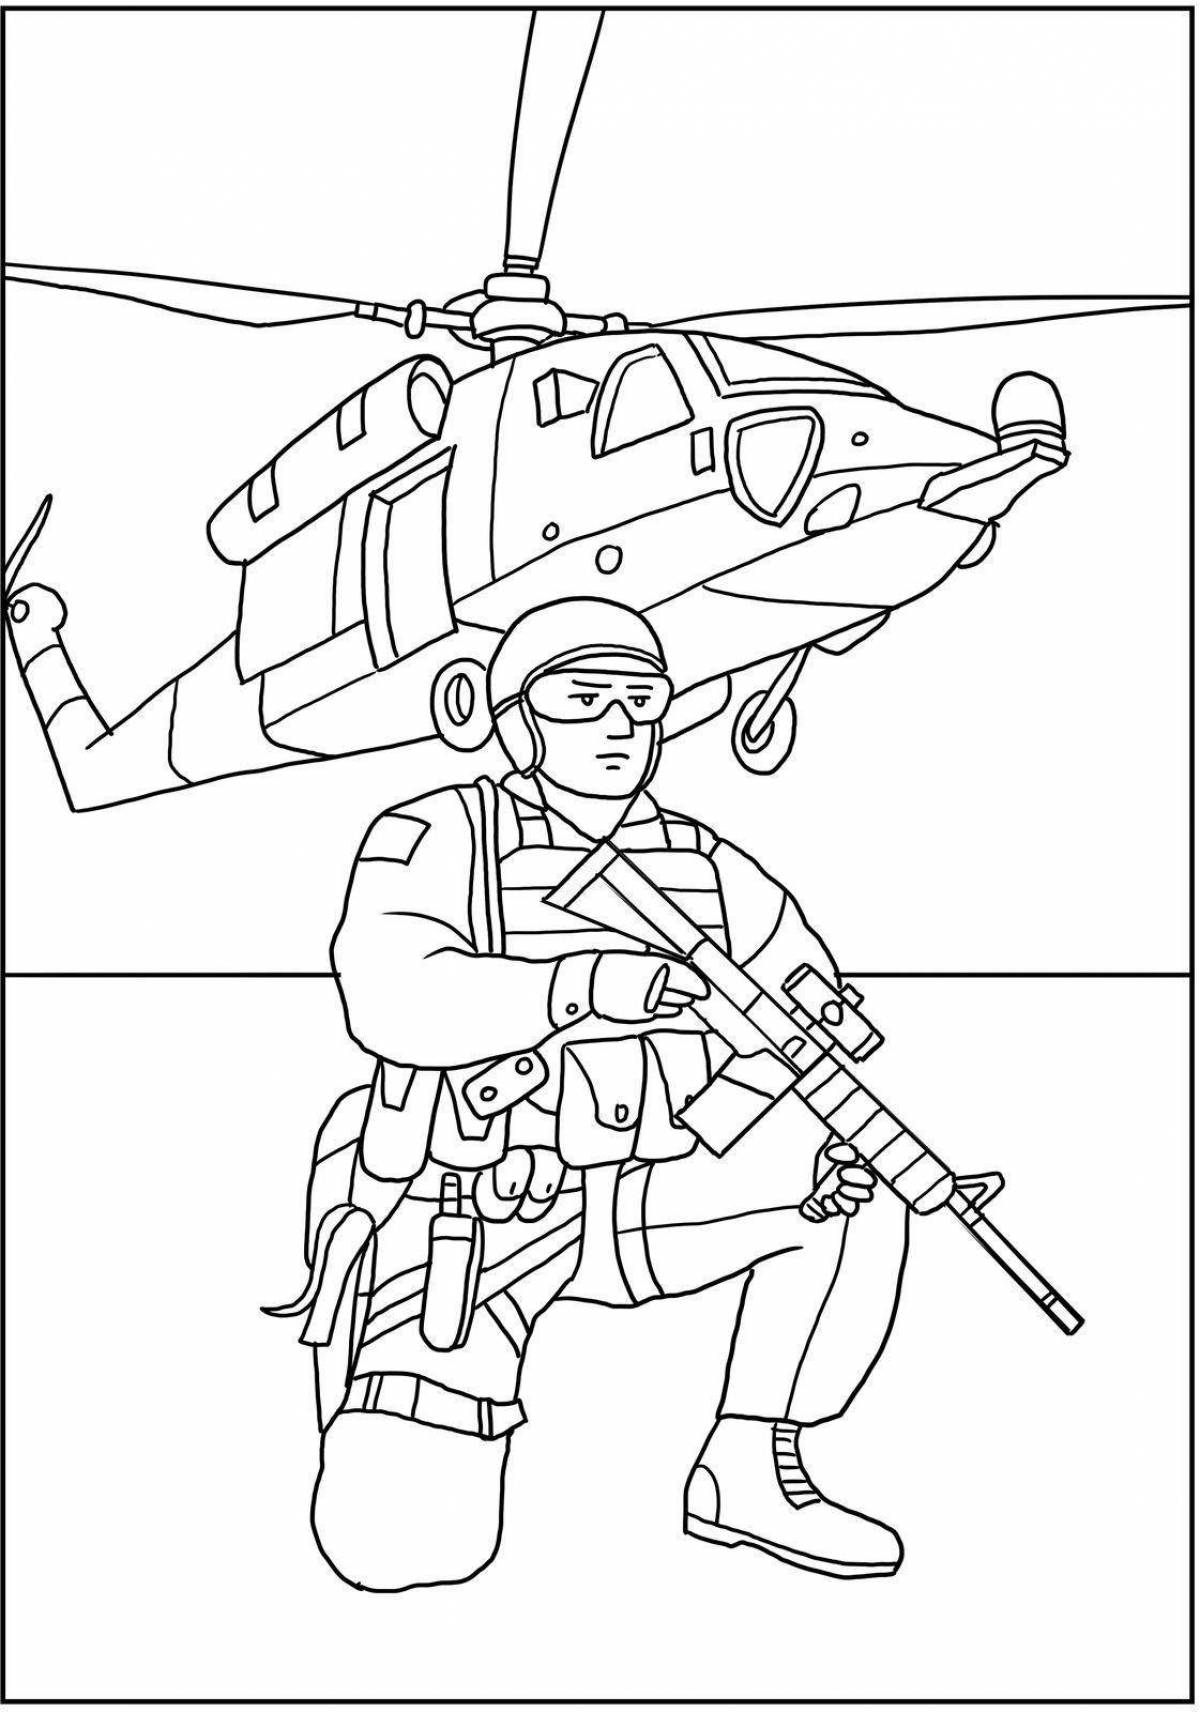 Awesome military soldier coloring pages